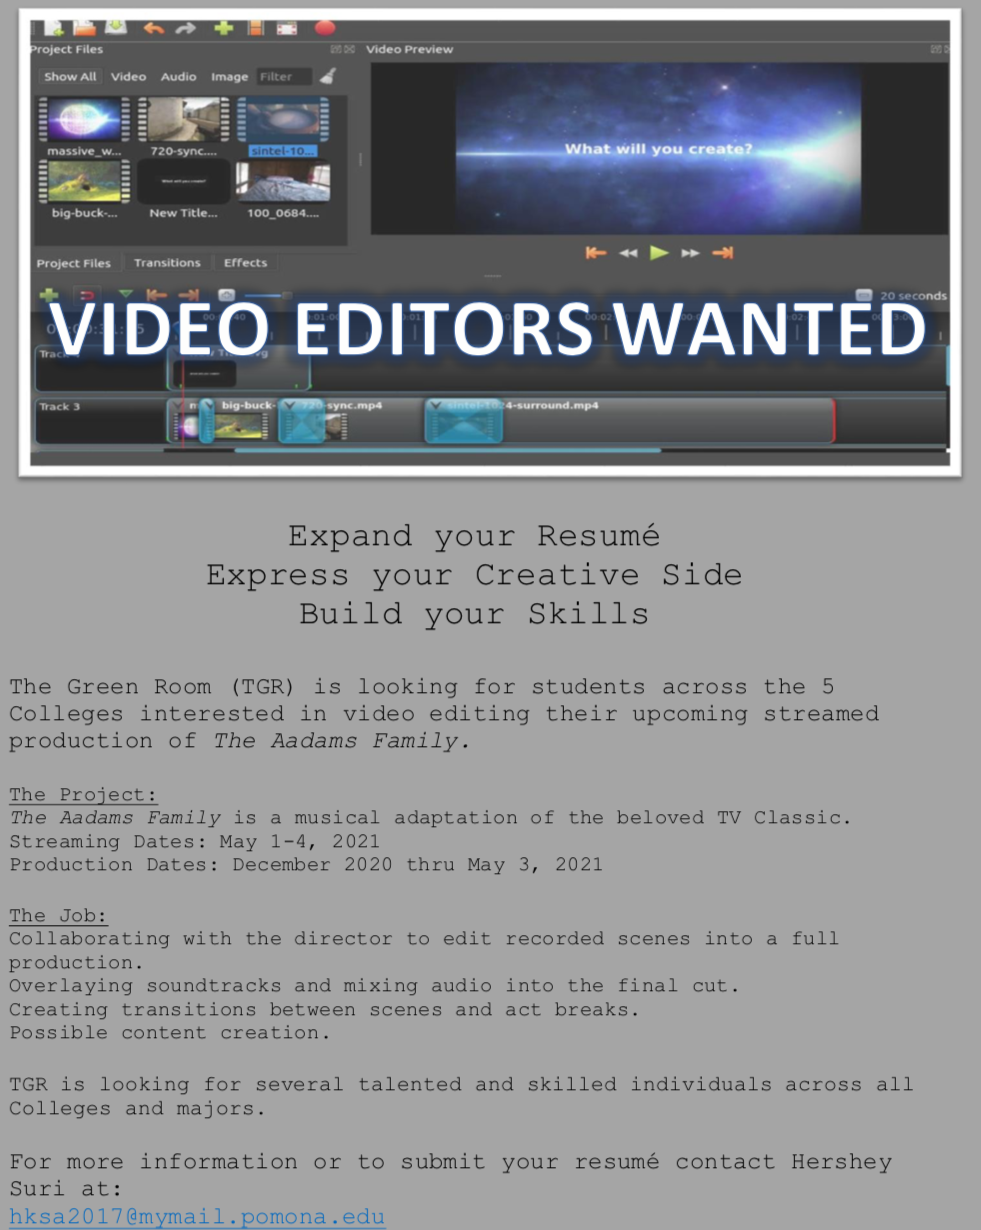 The Green Room Request for Video Editors